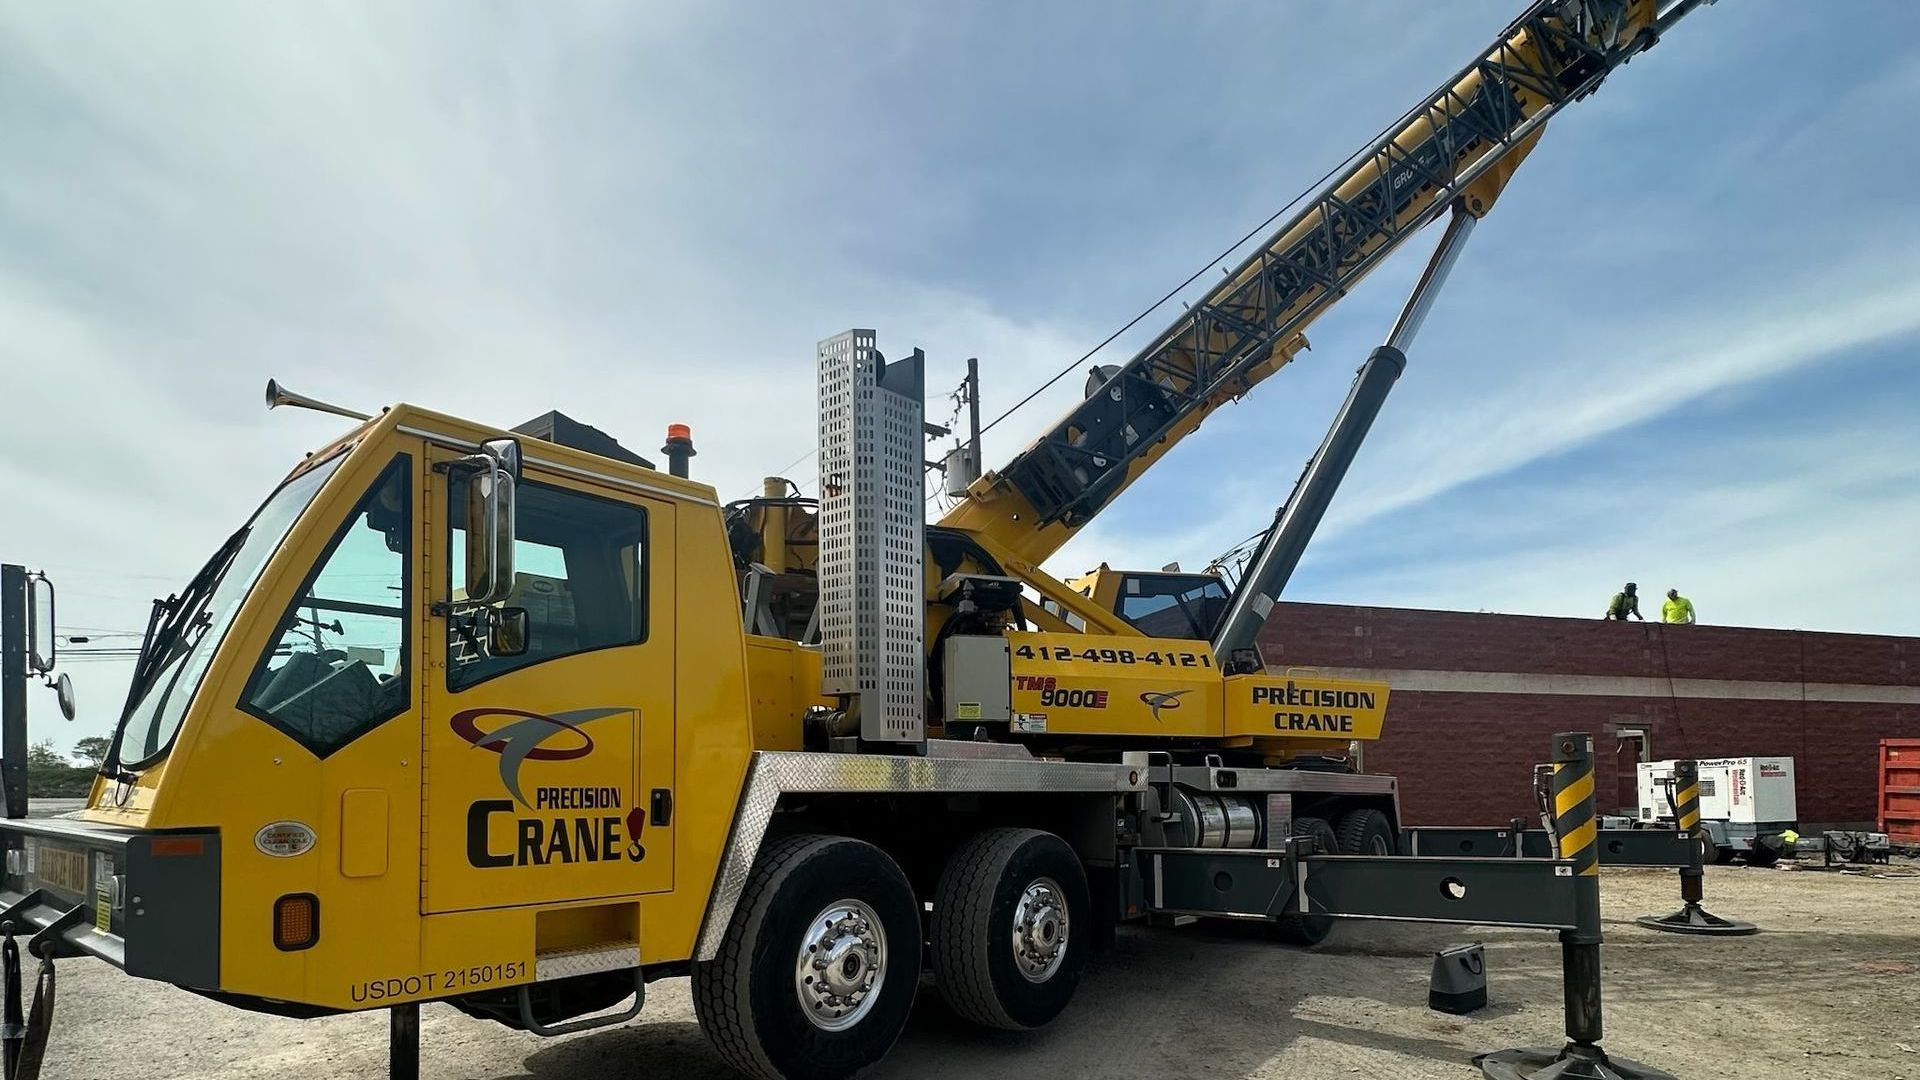 A large yellow crane is parked in front of a building.